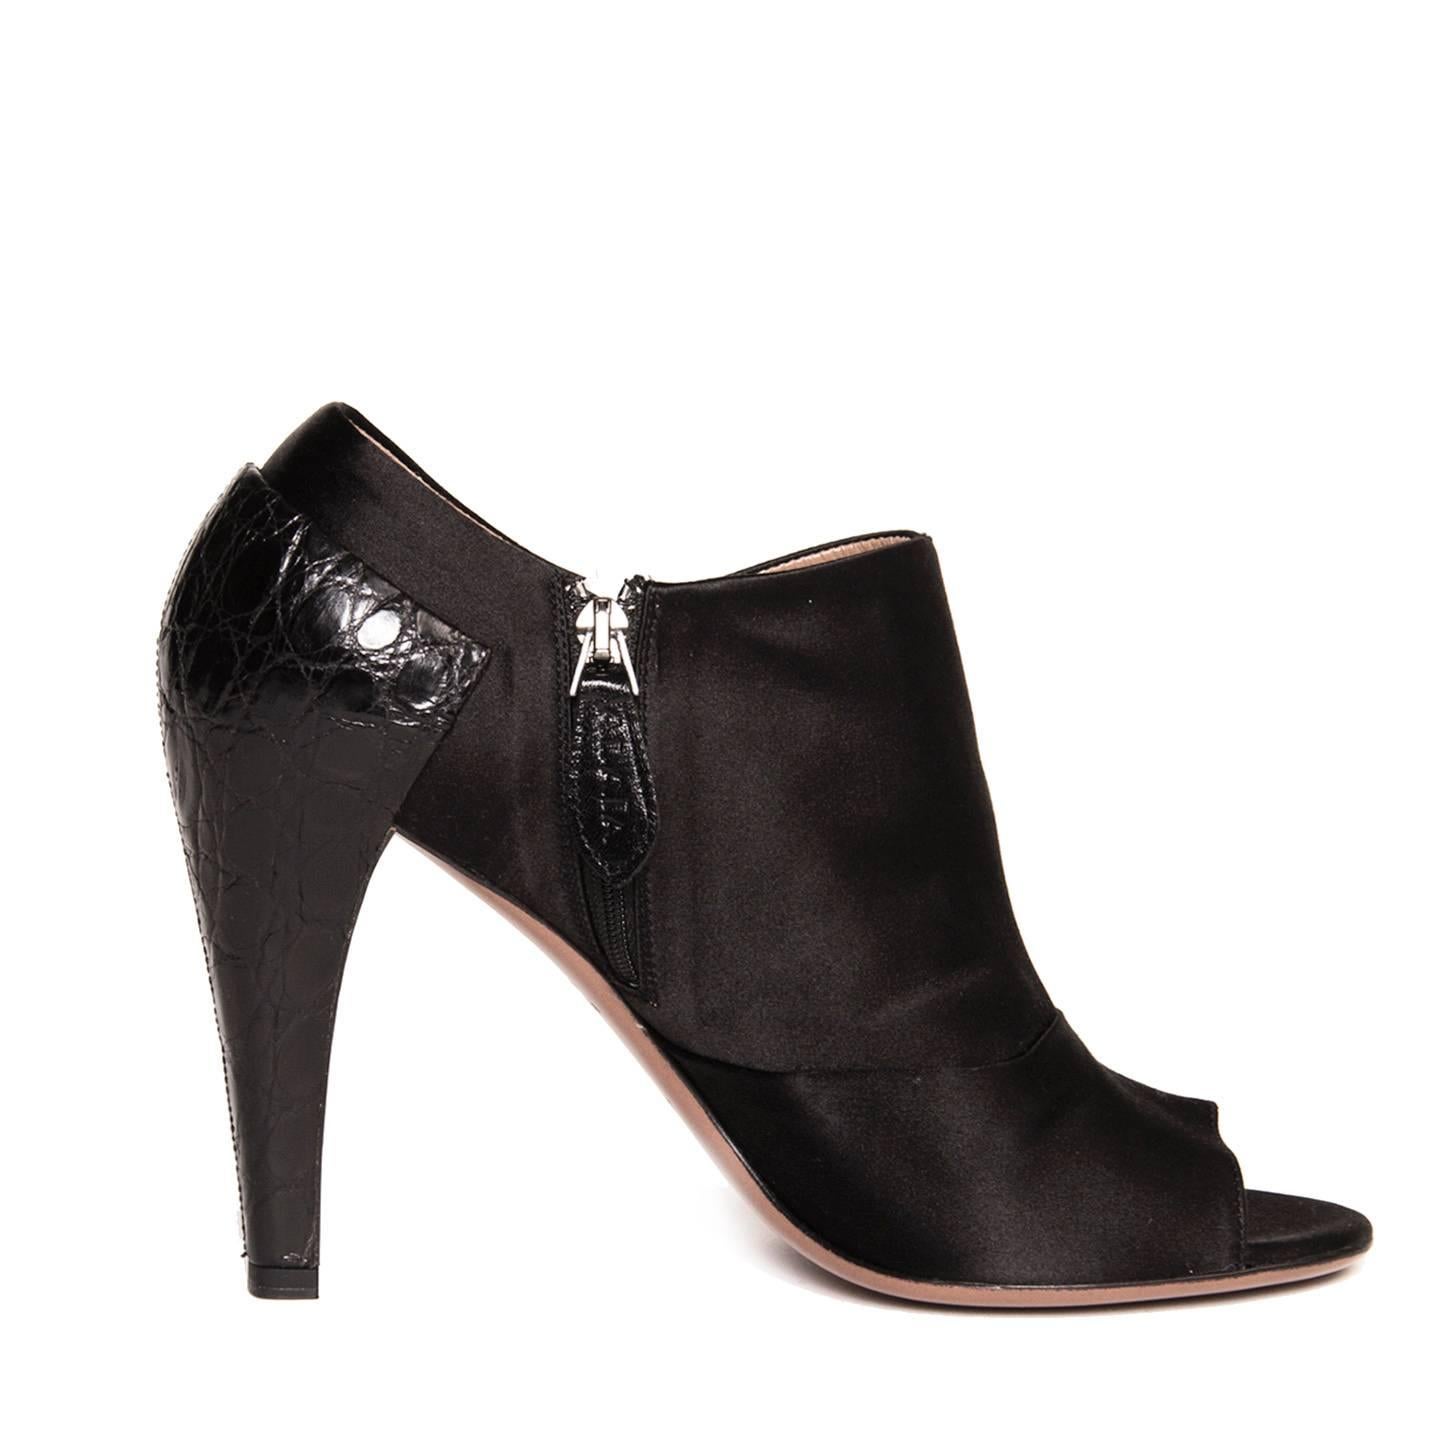 Alaïa Black Peep Toe Ankle Boots In New Condition For Sale In Brooklyn, NY